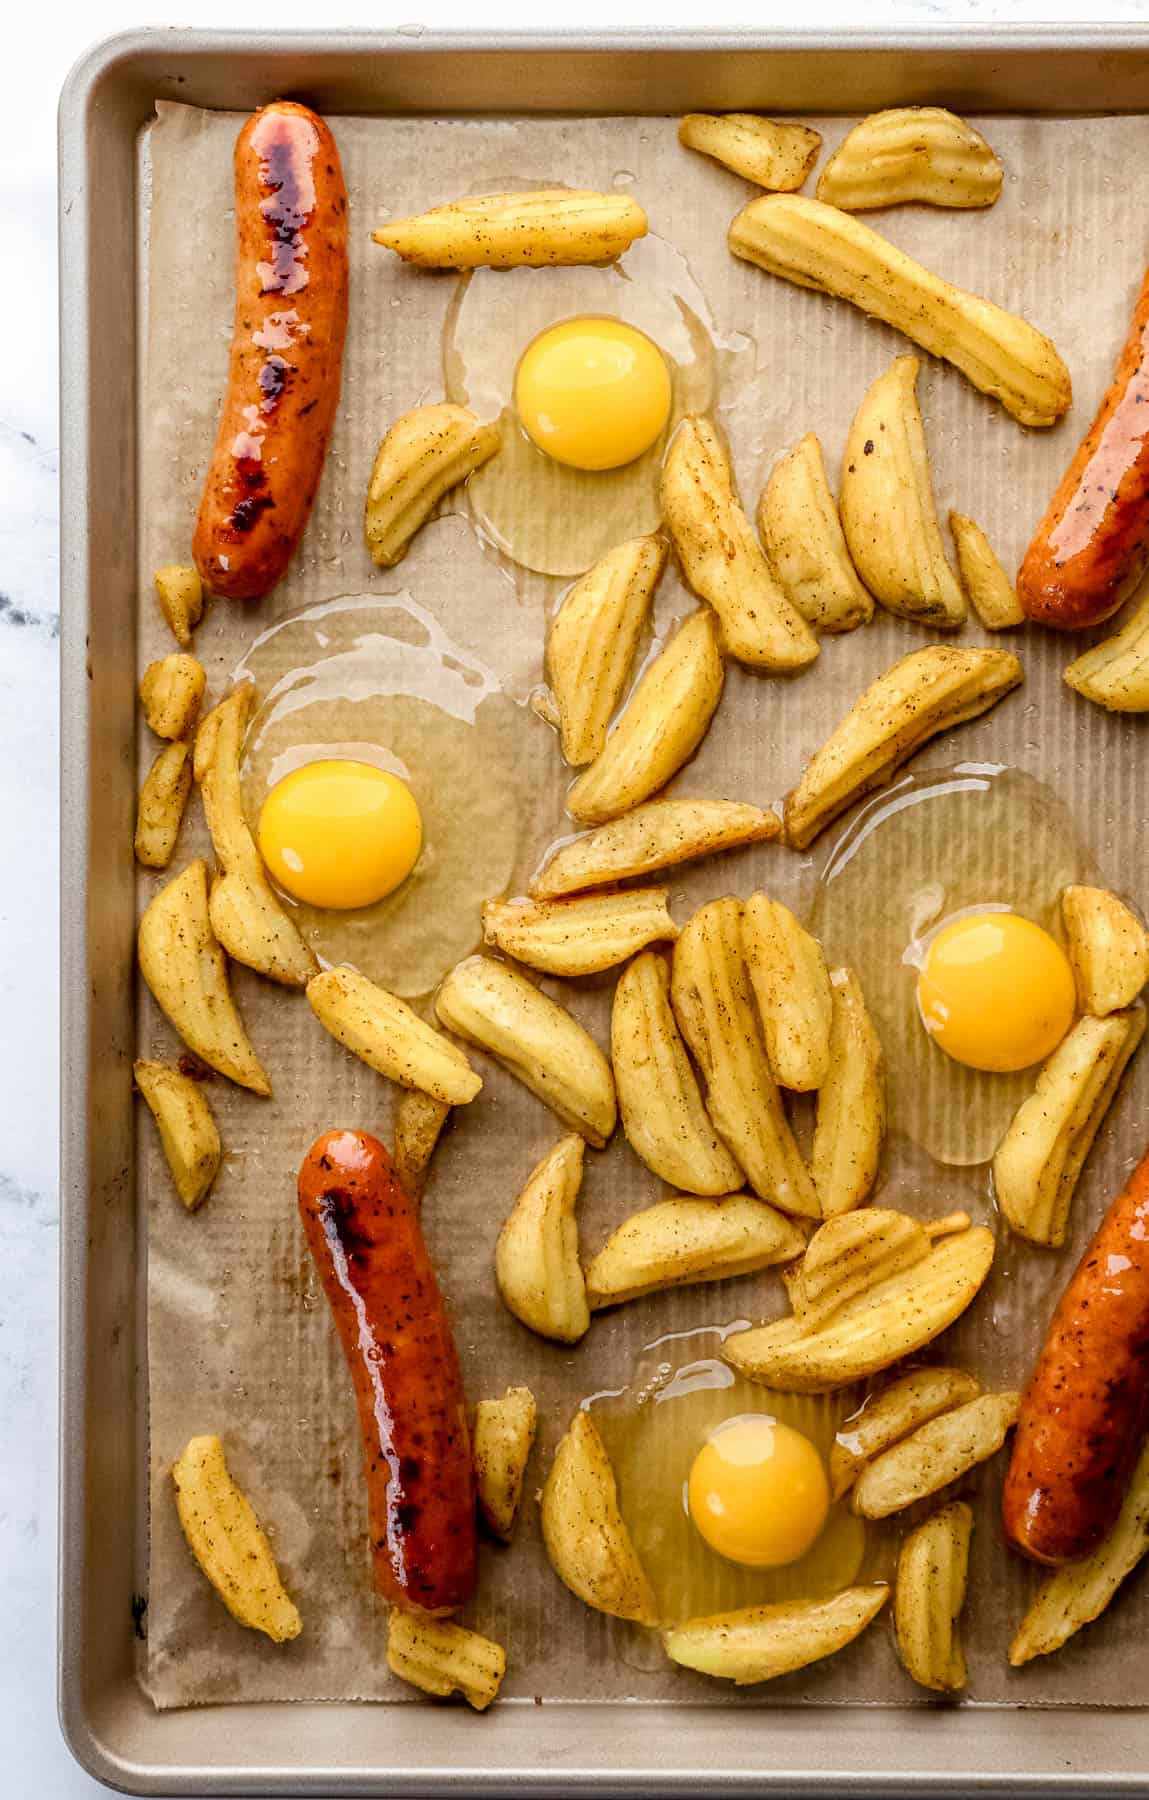 Raw eggs added to parchment lined baking sheet with potatoes and sausage. 